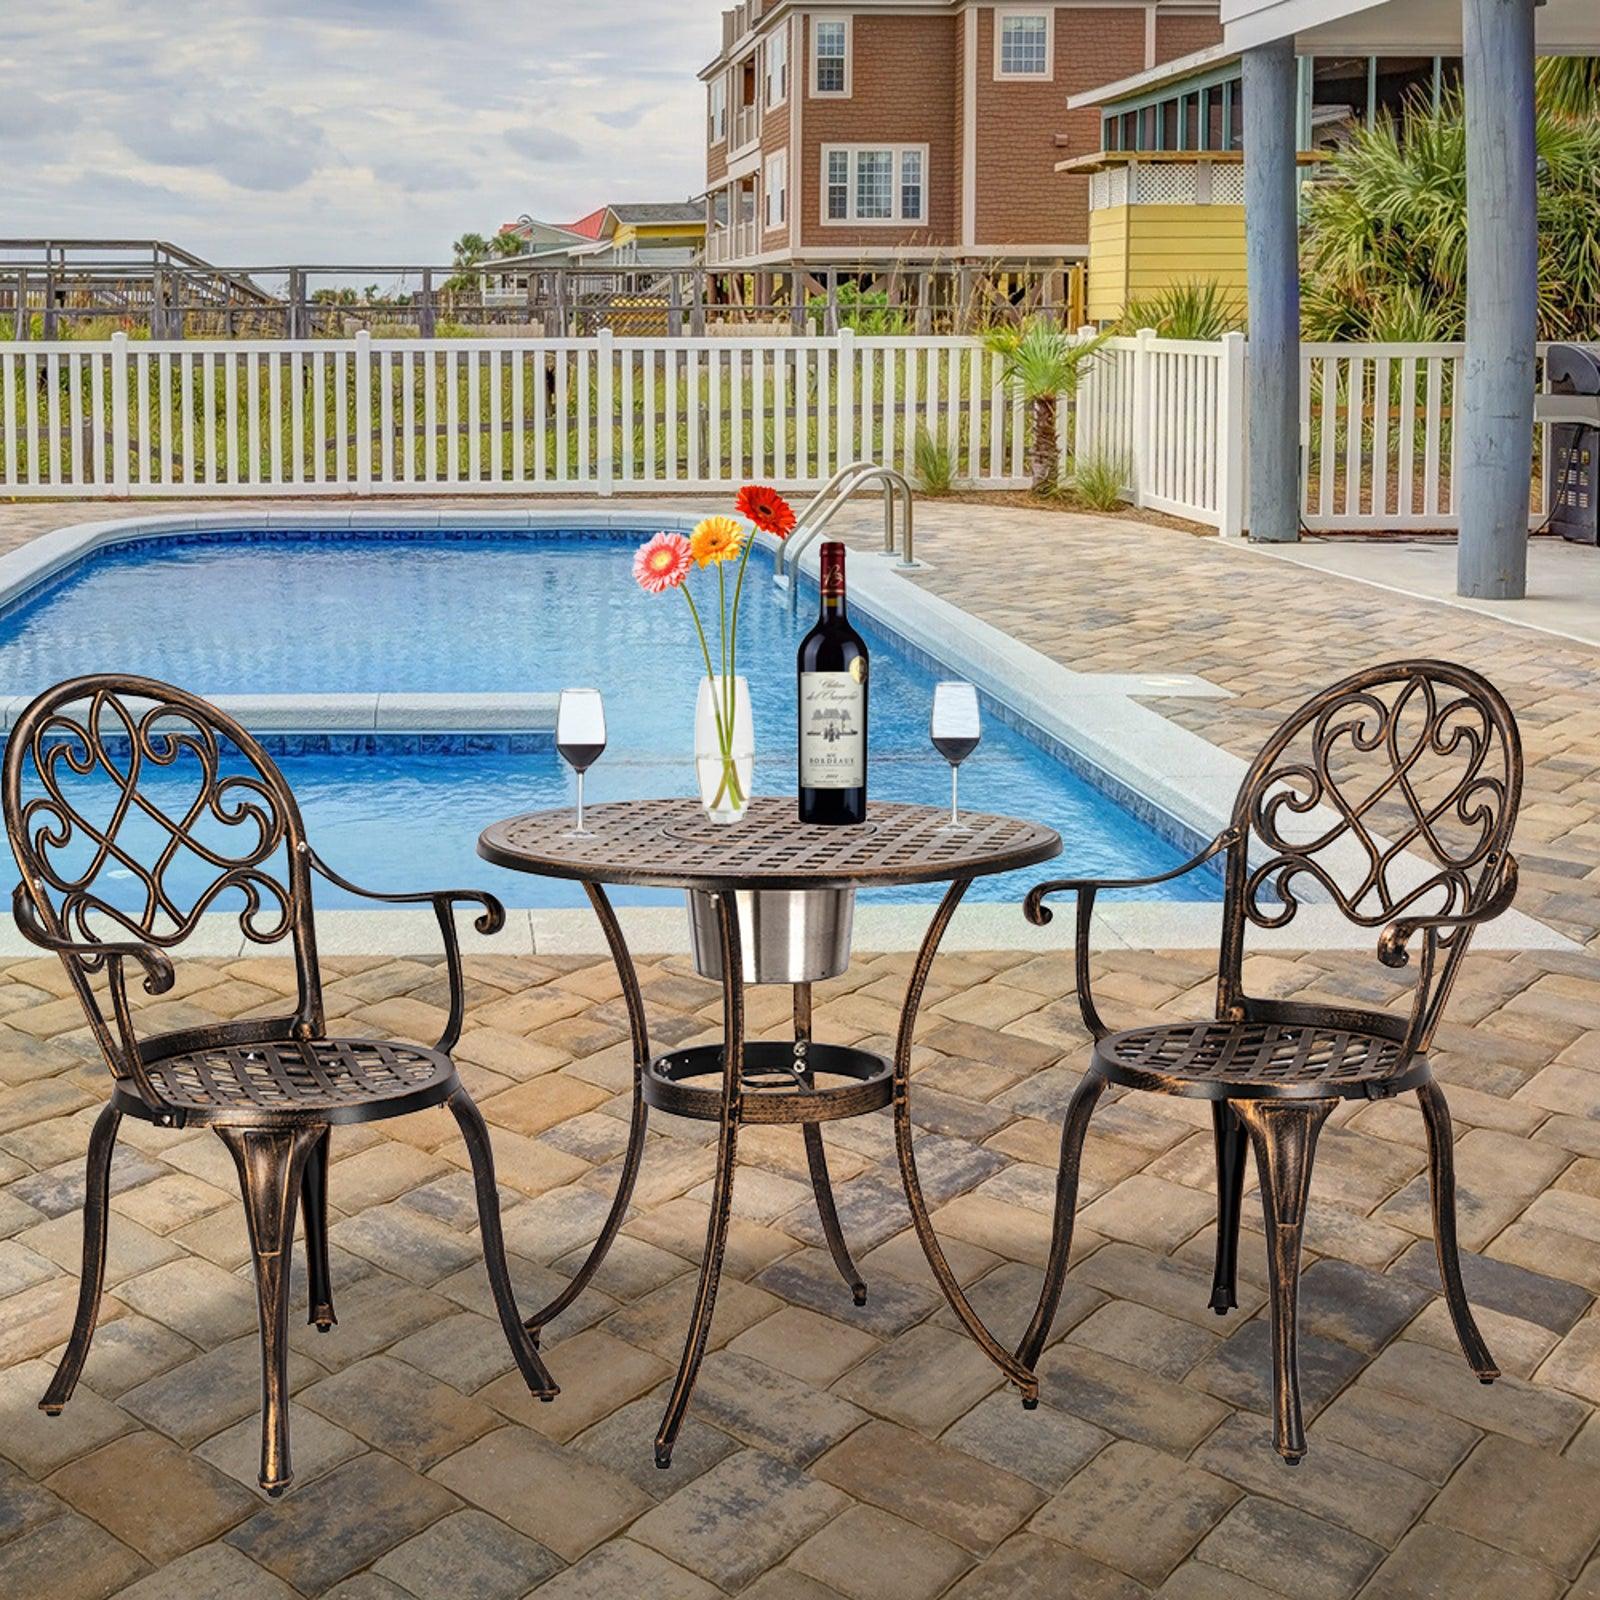 Outdoor 3 Piece Patio Bistro Set of Table and Chairs with Ice Bucket, Bronze, European Style Cast Aluminum - Charming Spaces